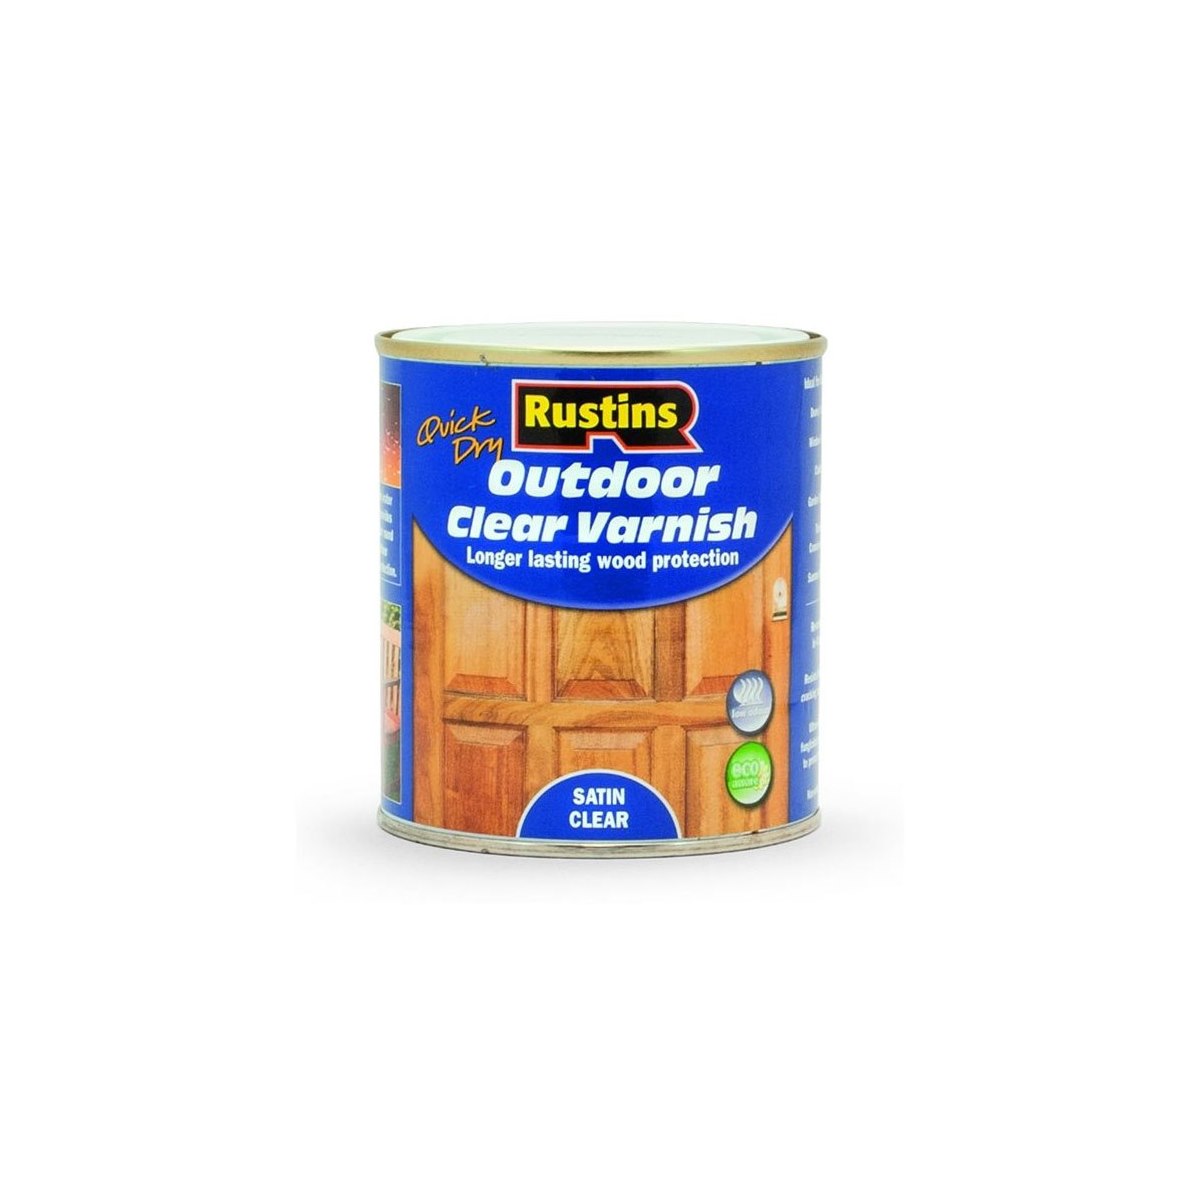 Rustins Quick Dry Outdoor Clear Varnish Satin 500ml